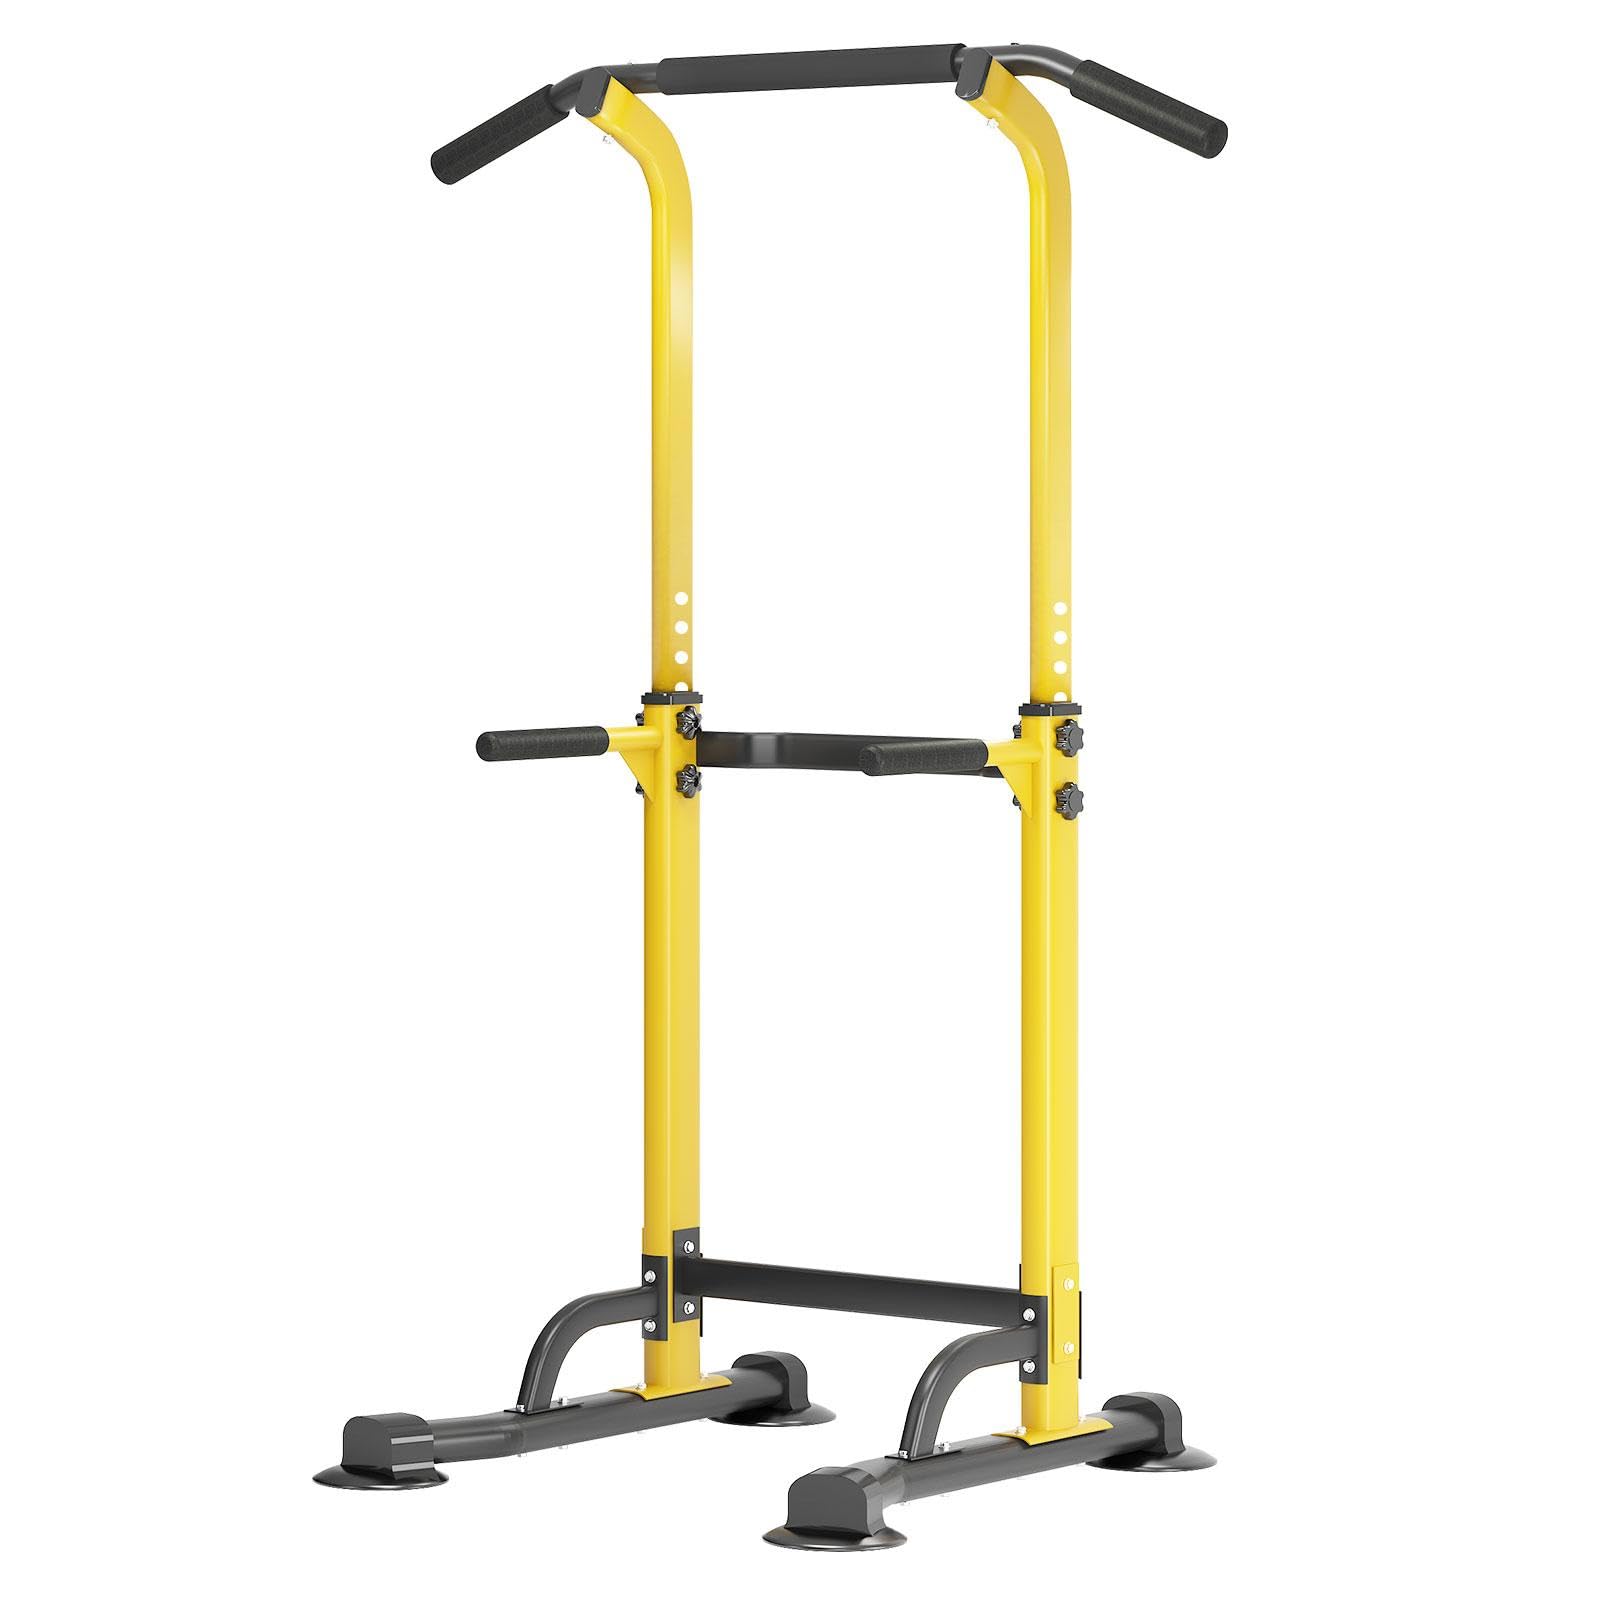 soges Power Tower Pull Up Bar Station, Free Standing Pull Up Rack Dip Station for Home Gym, Height Adjustable Home Strength Trai